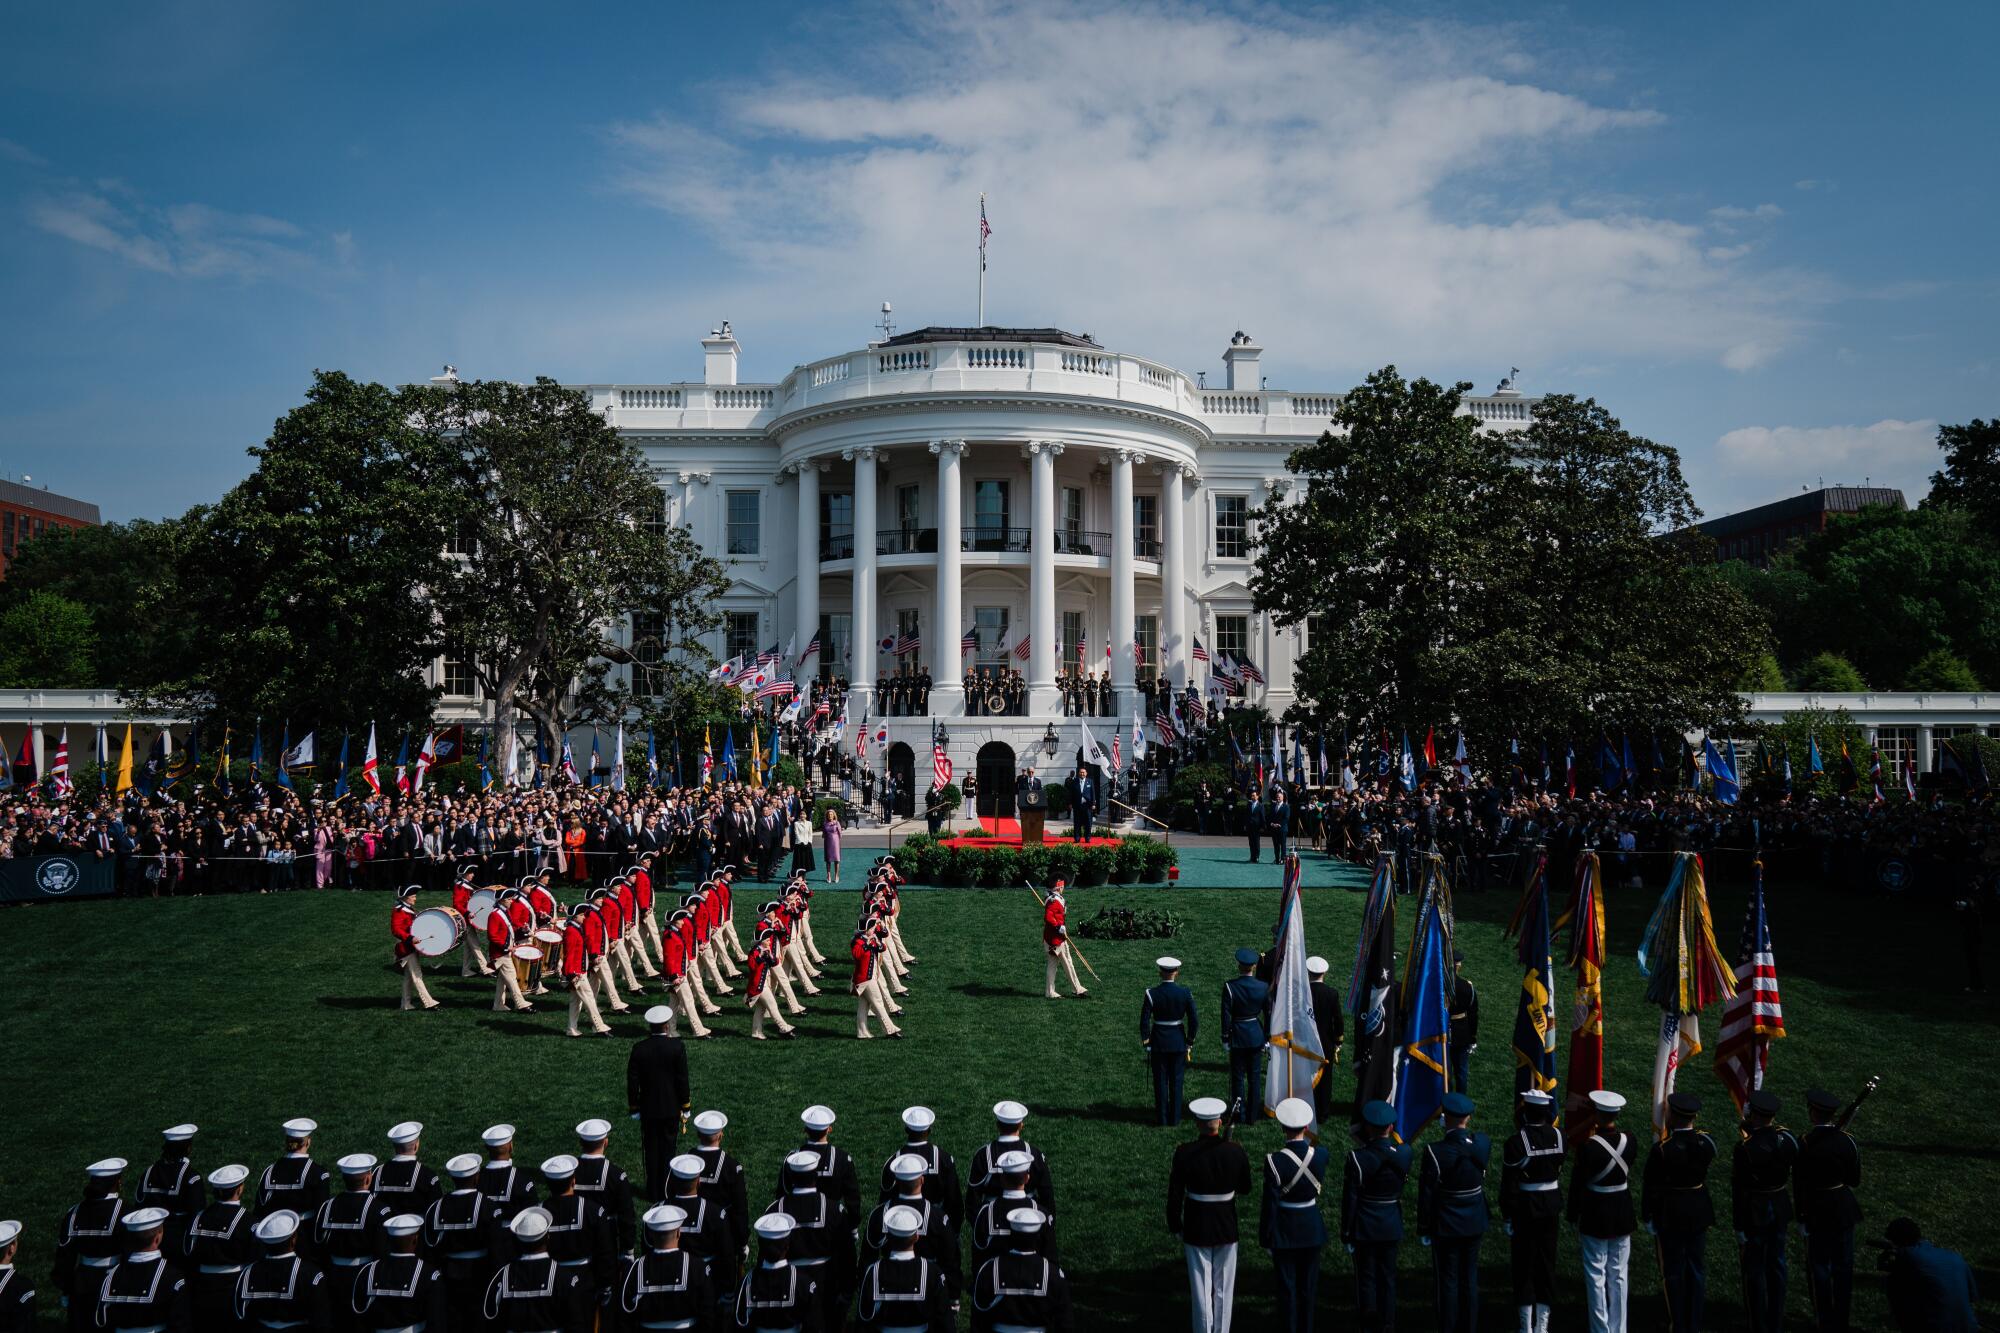 The Fife and Drum Corps marches at the South Lawn of the White House